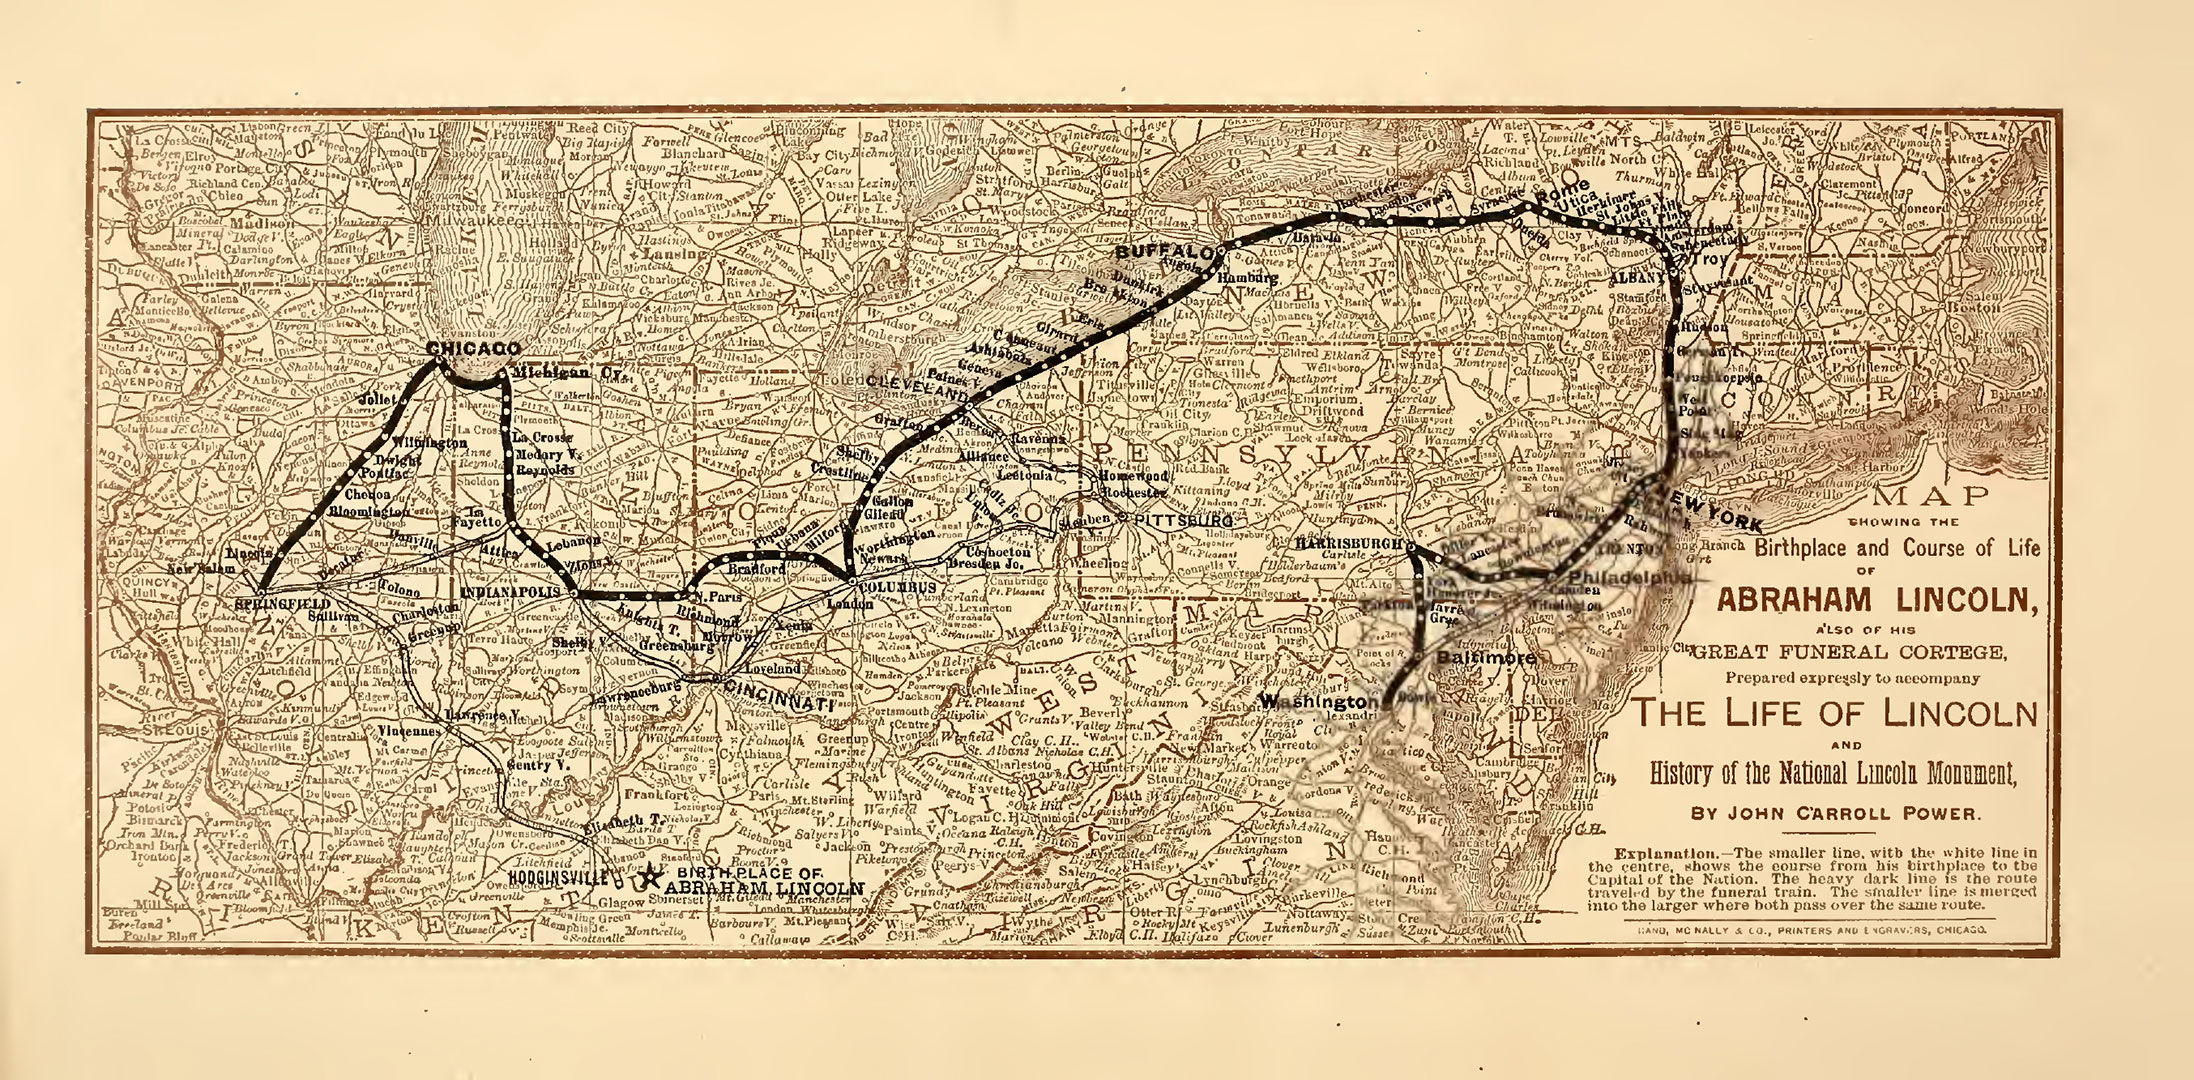 Sepia toned map of the eastern United States from the coast to Illinois. The route of President Lincoln's funeral trail has been marked out.